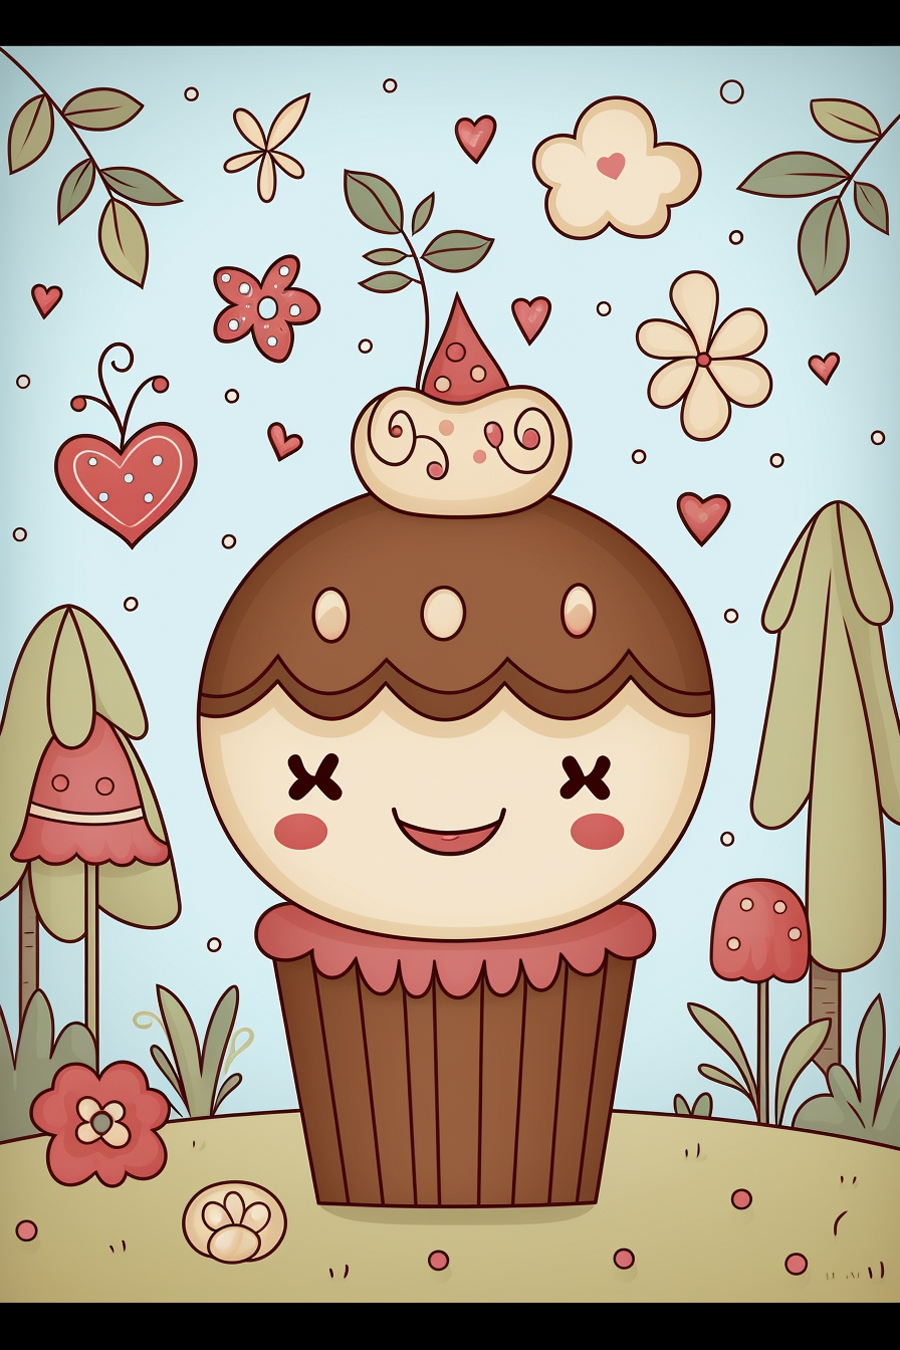 A cartoon cupcake with hearts and flowers.